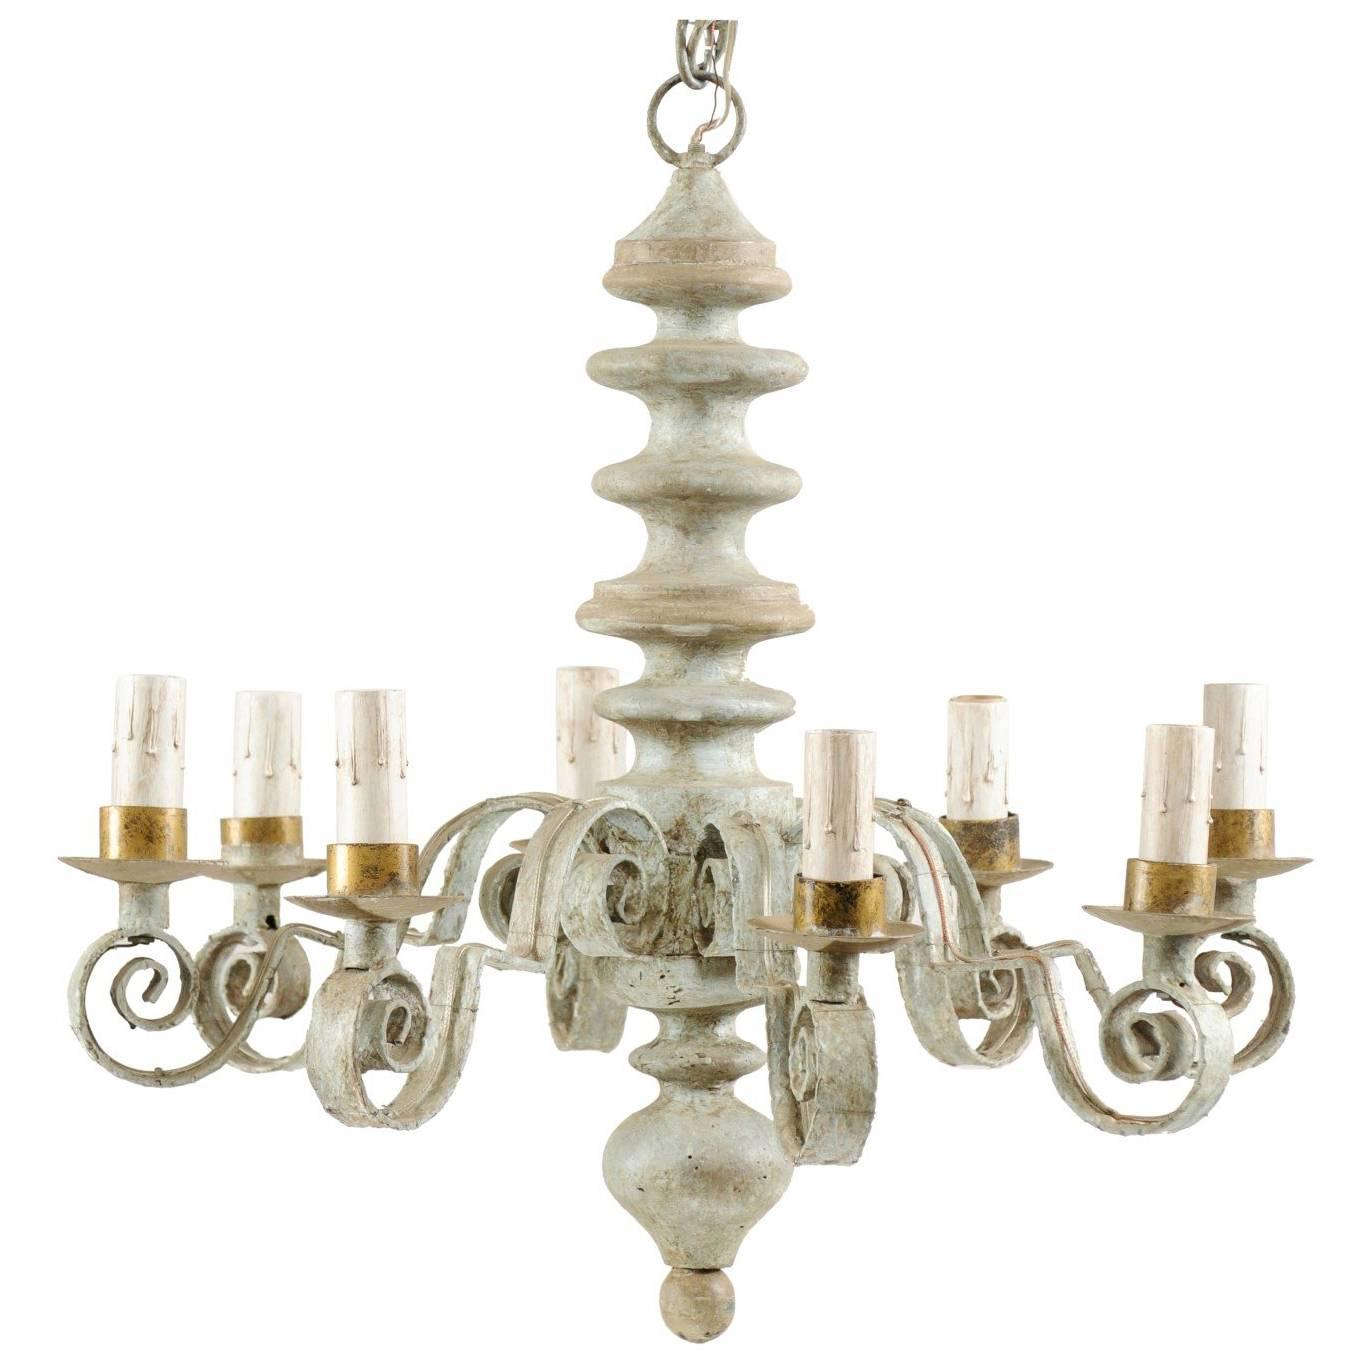 French Mid-20th Century Turned Wood and Scrolled Iron Chandelier in Soft Green